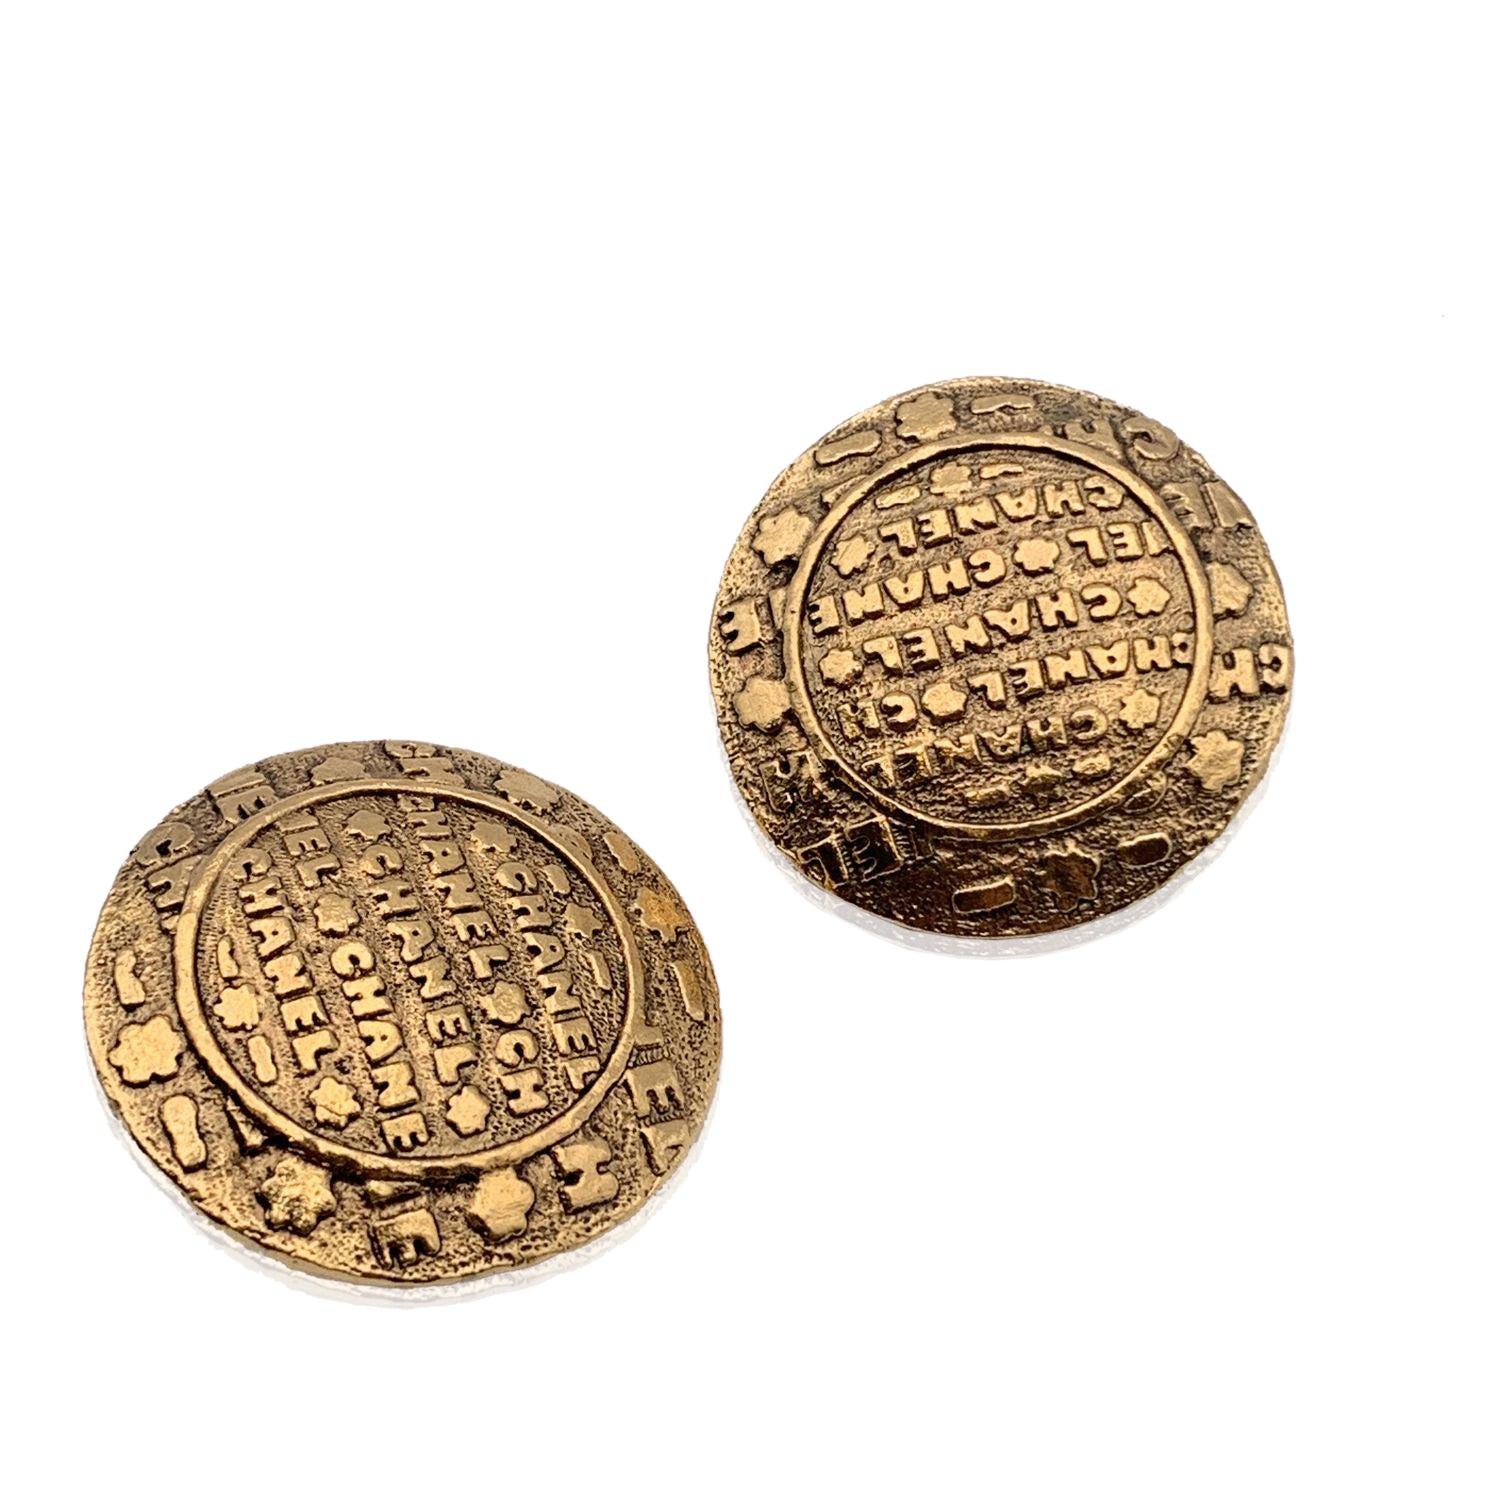 Beautiful vintage clip on earrings by CHANEL. They are finely crafted in gold metal with embossed CHANEL signatures. Clip on closure on the back. 'CHANEL - 2 CC 8 - Made in France' oval tag on the reverse of the earring. Diameter: 30 mm Condition A